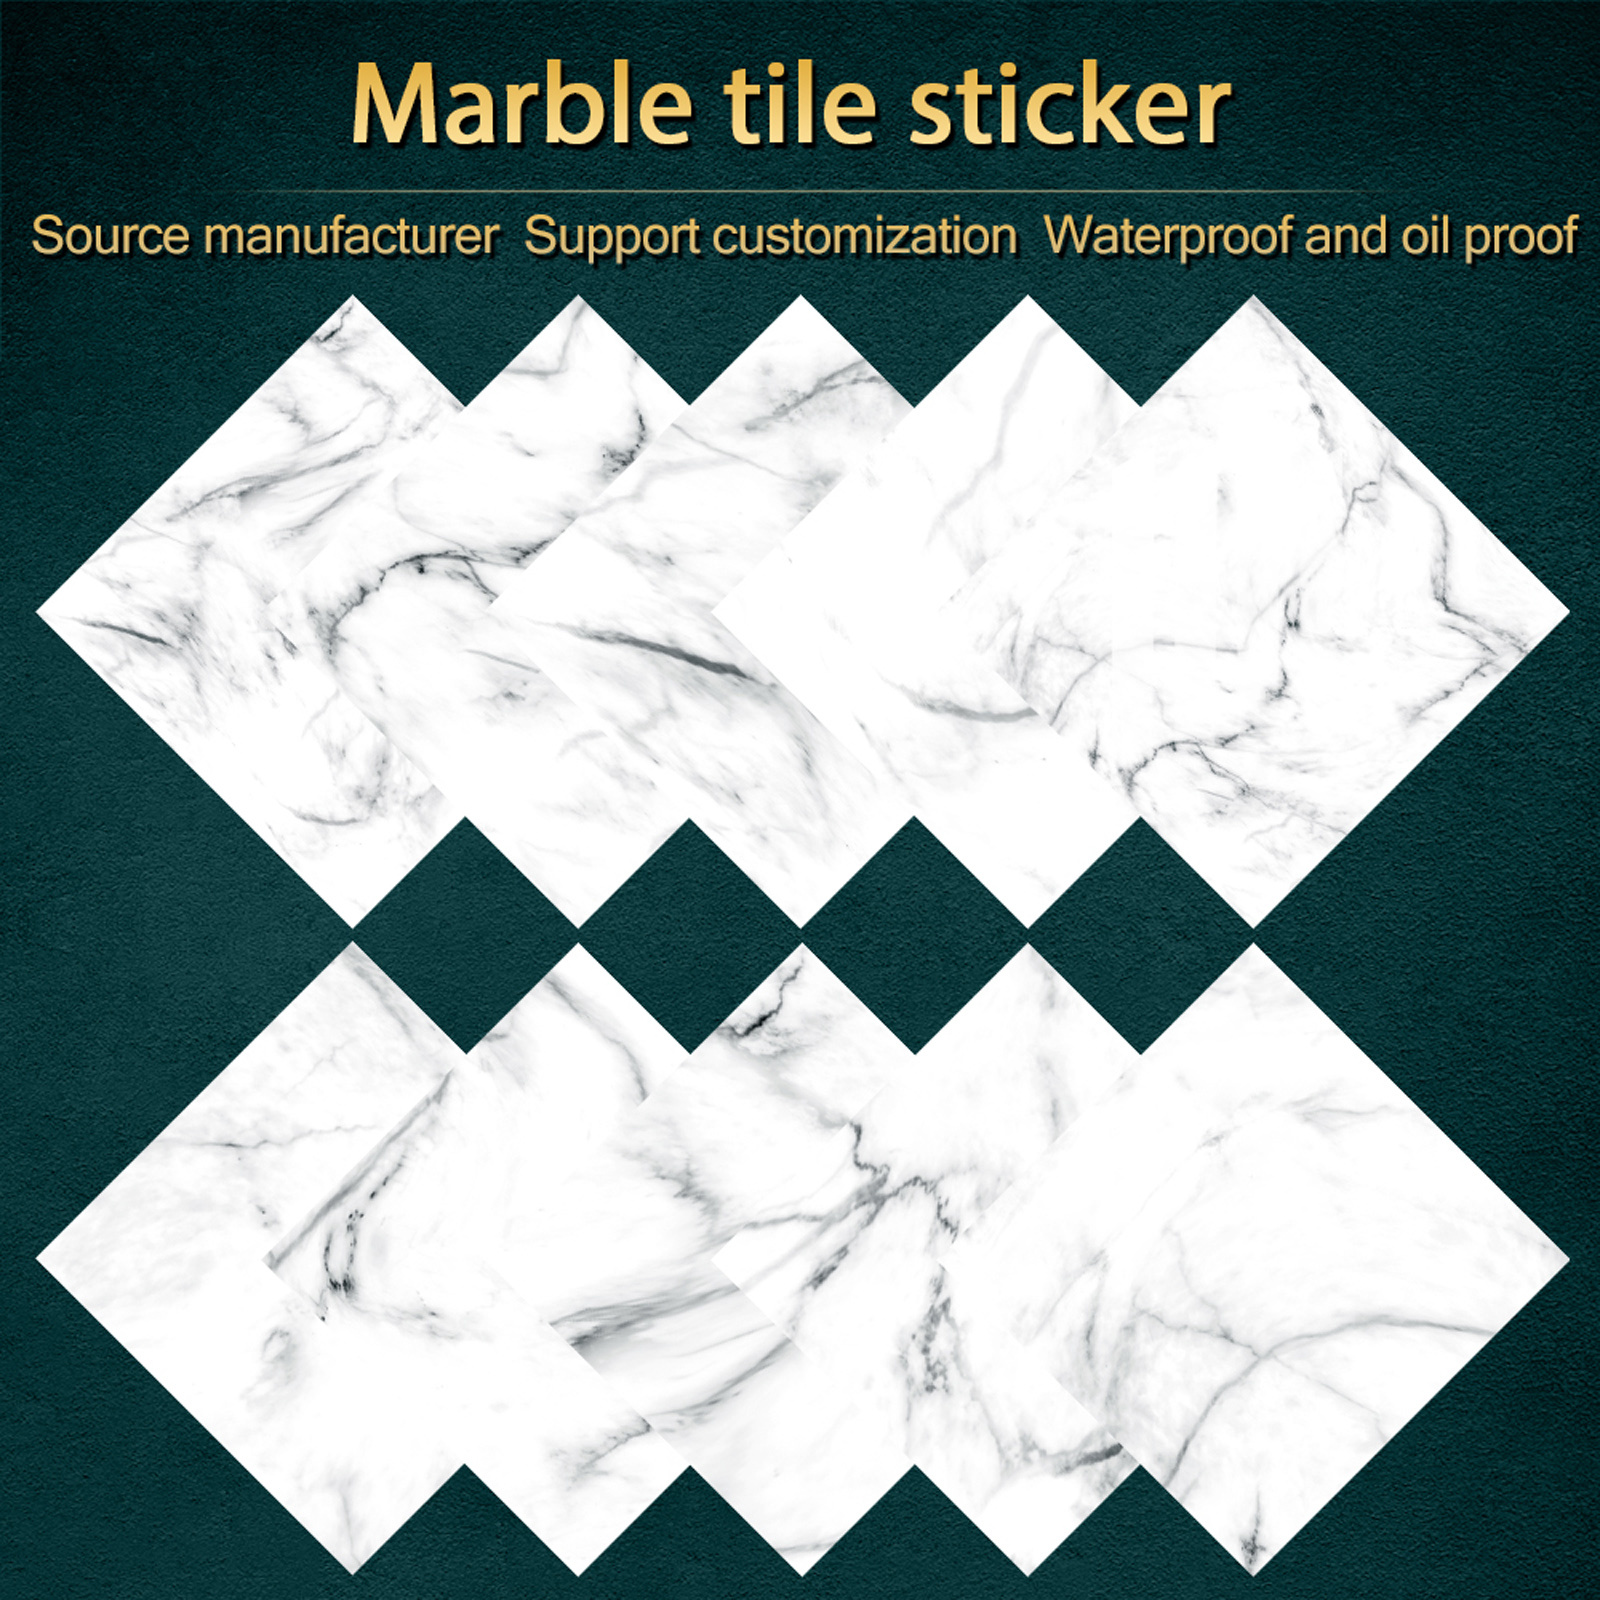 

10pcs Waterproof Marble Tile Stickers - Self-adhesive Vinyl Tiles For Bathroom Floor - 12x12 Inches - Peel And Stick - Easy To Install And Remove - Durable And Long-lasting